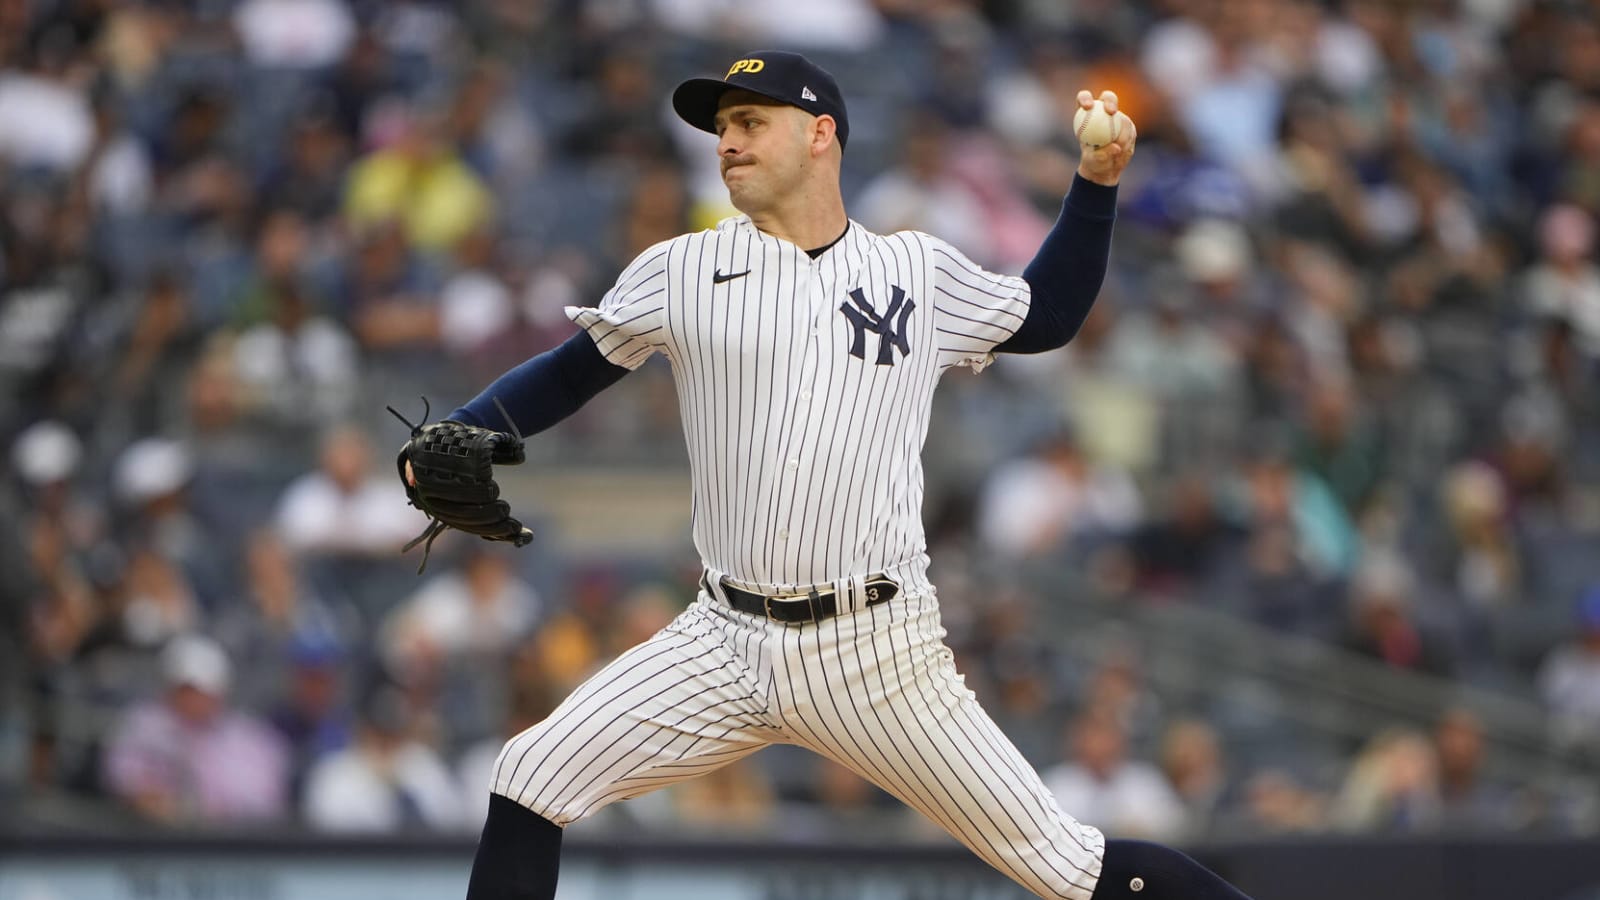 Braves made 'potentially valuable under-the-radar' trade with Yankees